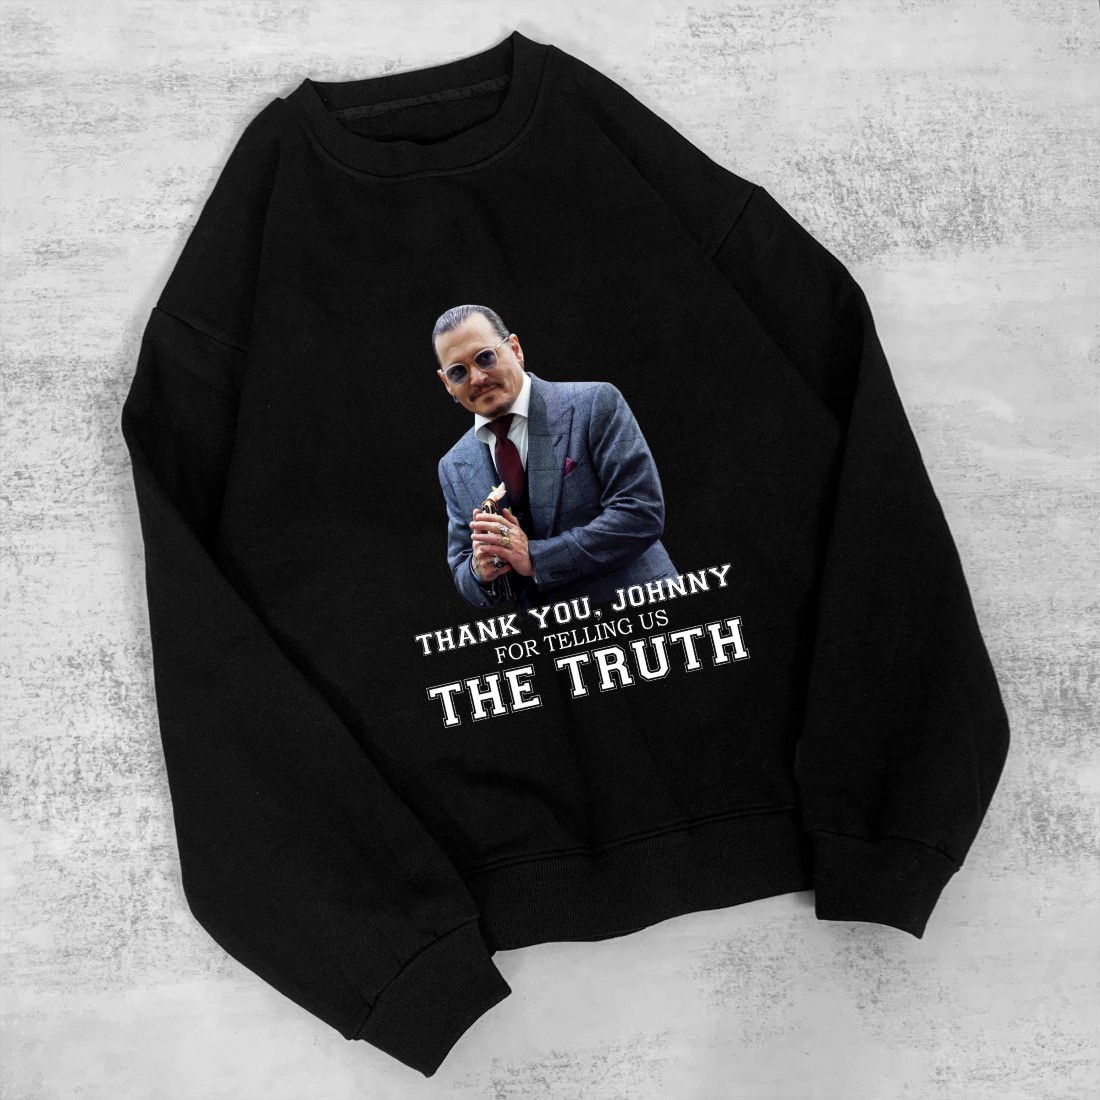 Johnny Depp Winner Thank you Johnny for Telling Us The Truth Shirt